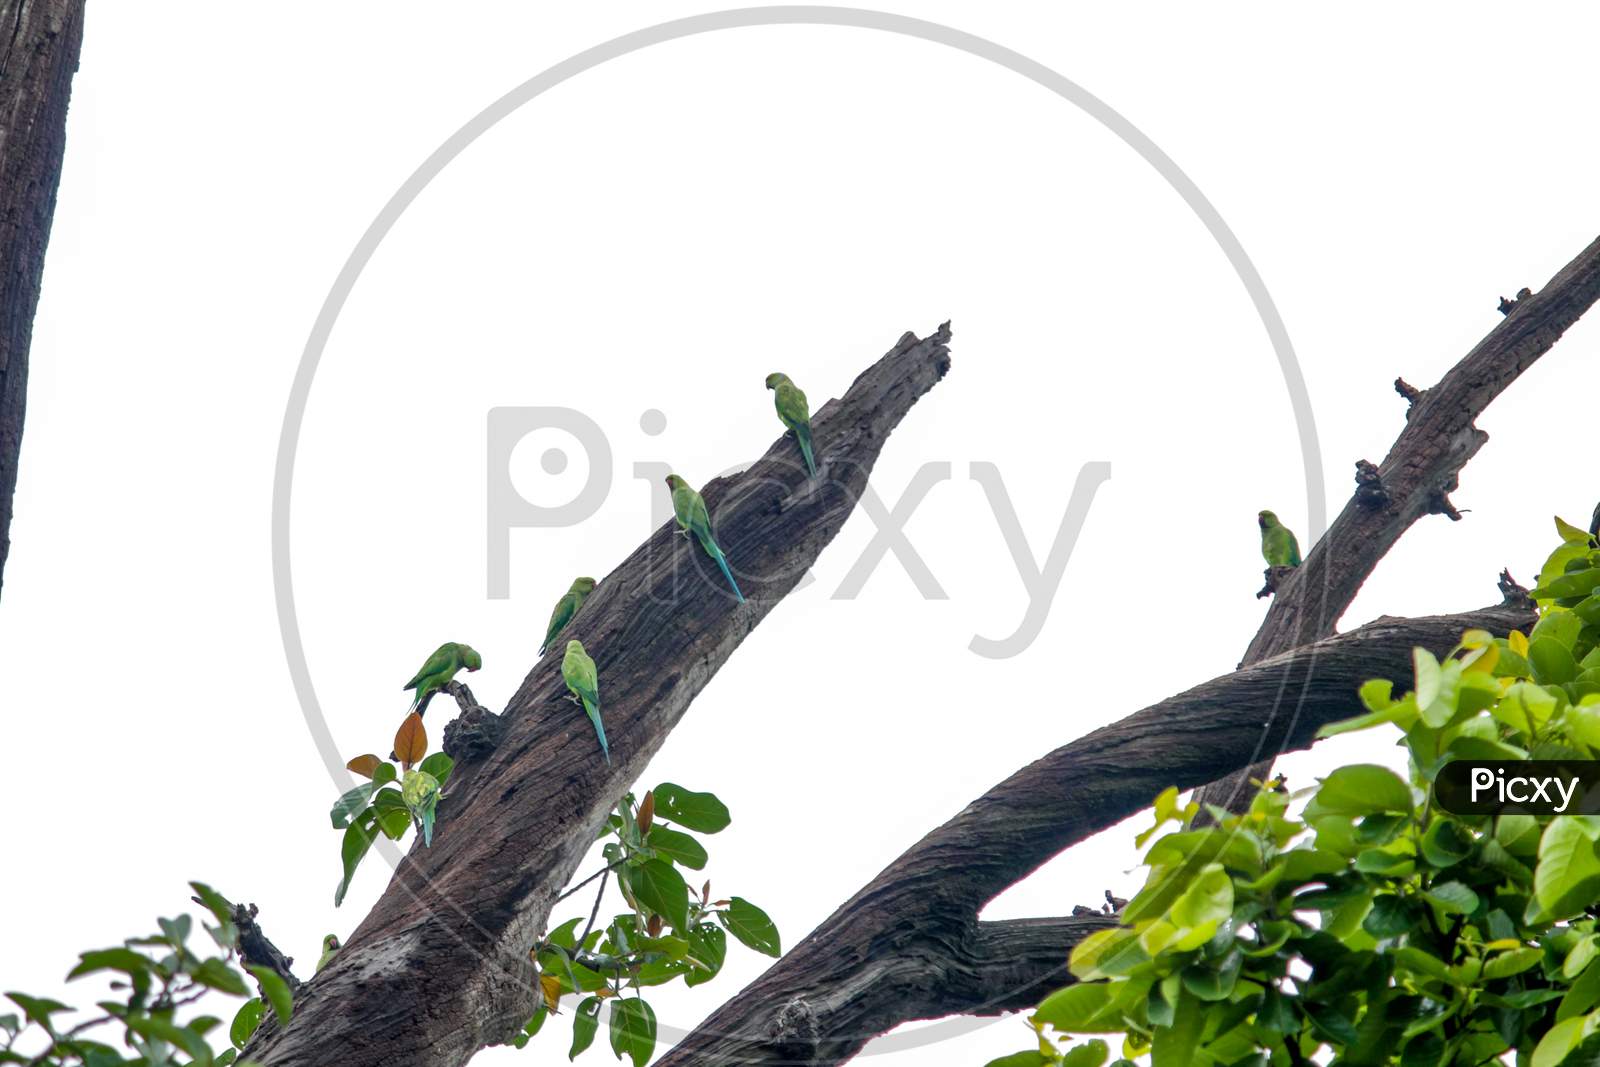 Group Of Parrots On Dead Tree Branch